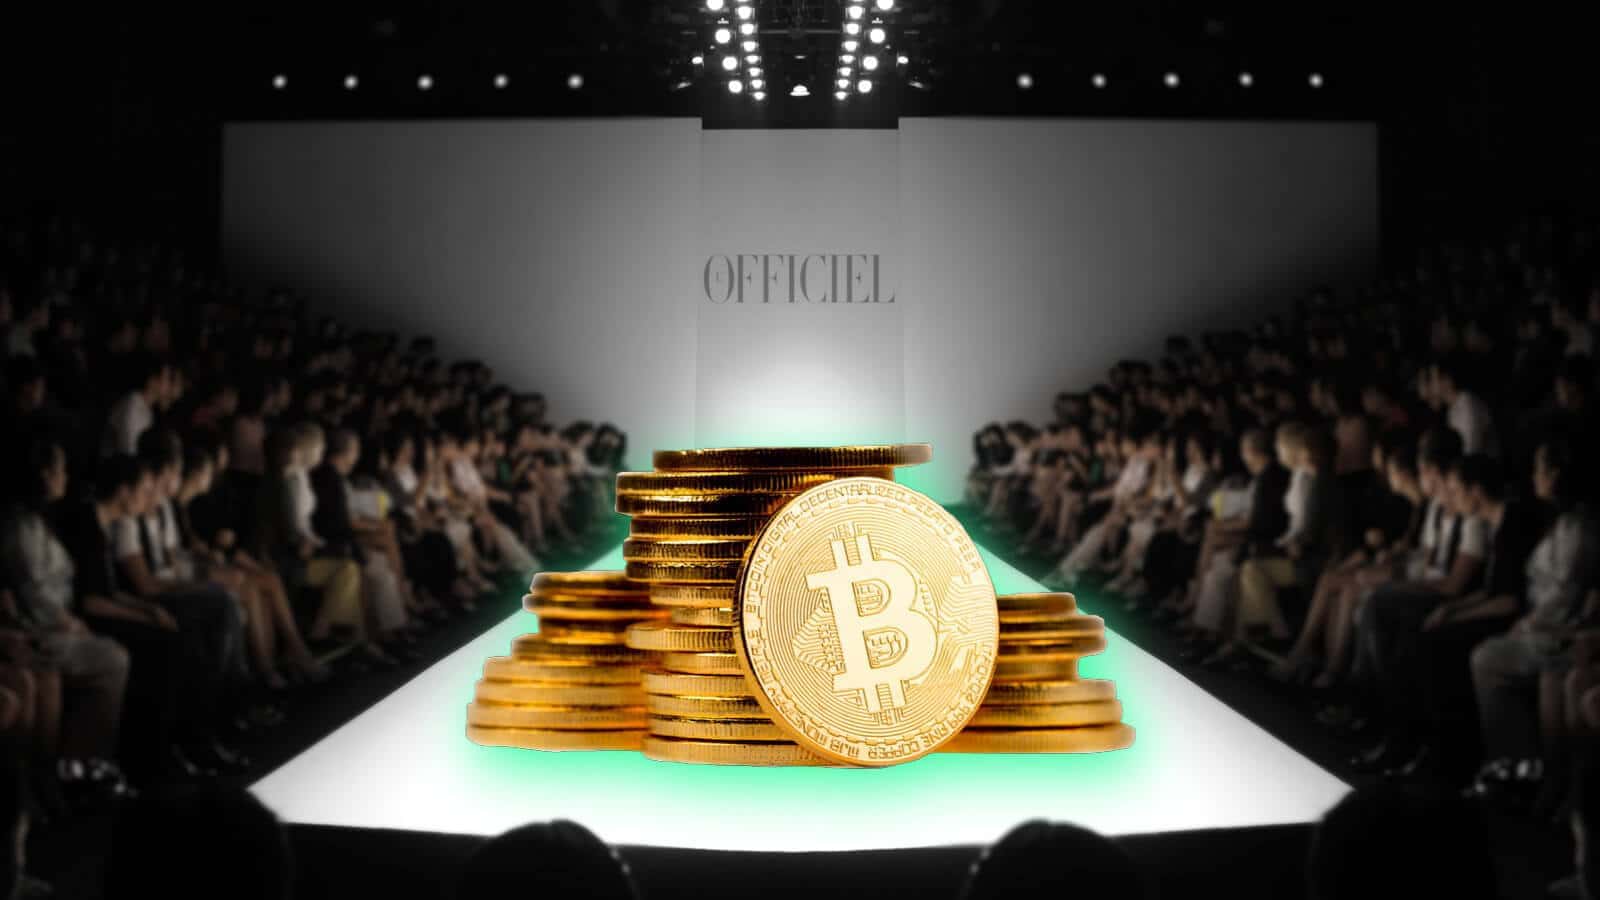 L'Officiel Fashion Magazine To Give Out $100M in Cryptocurrency